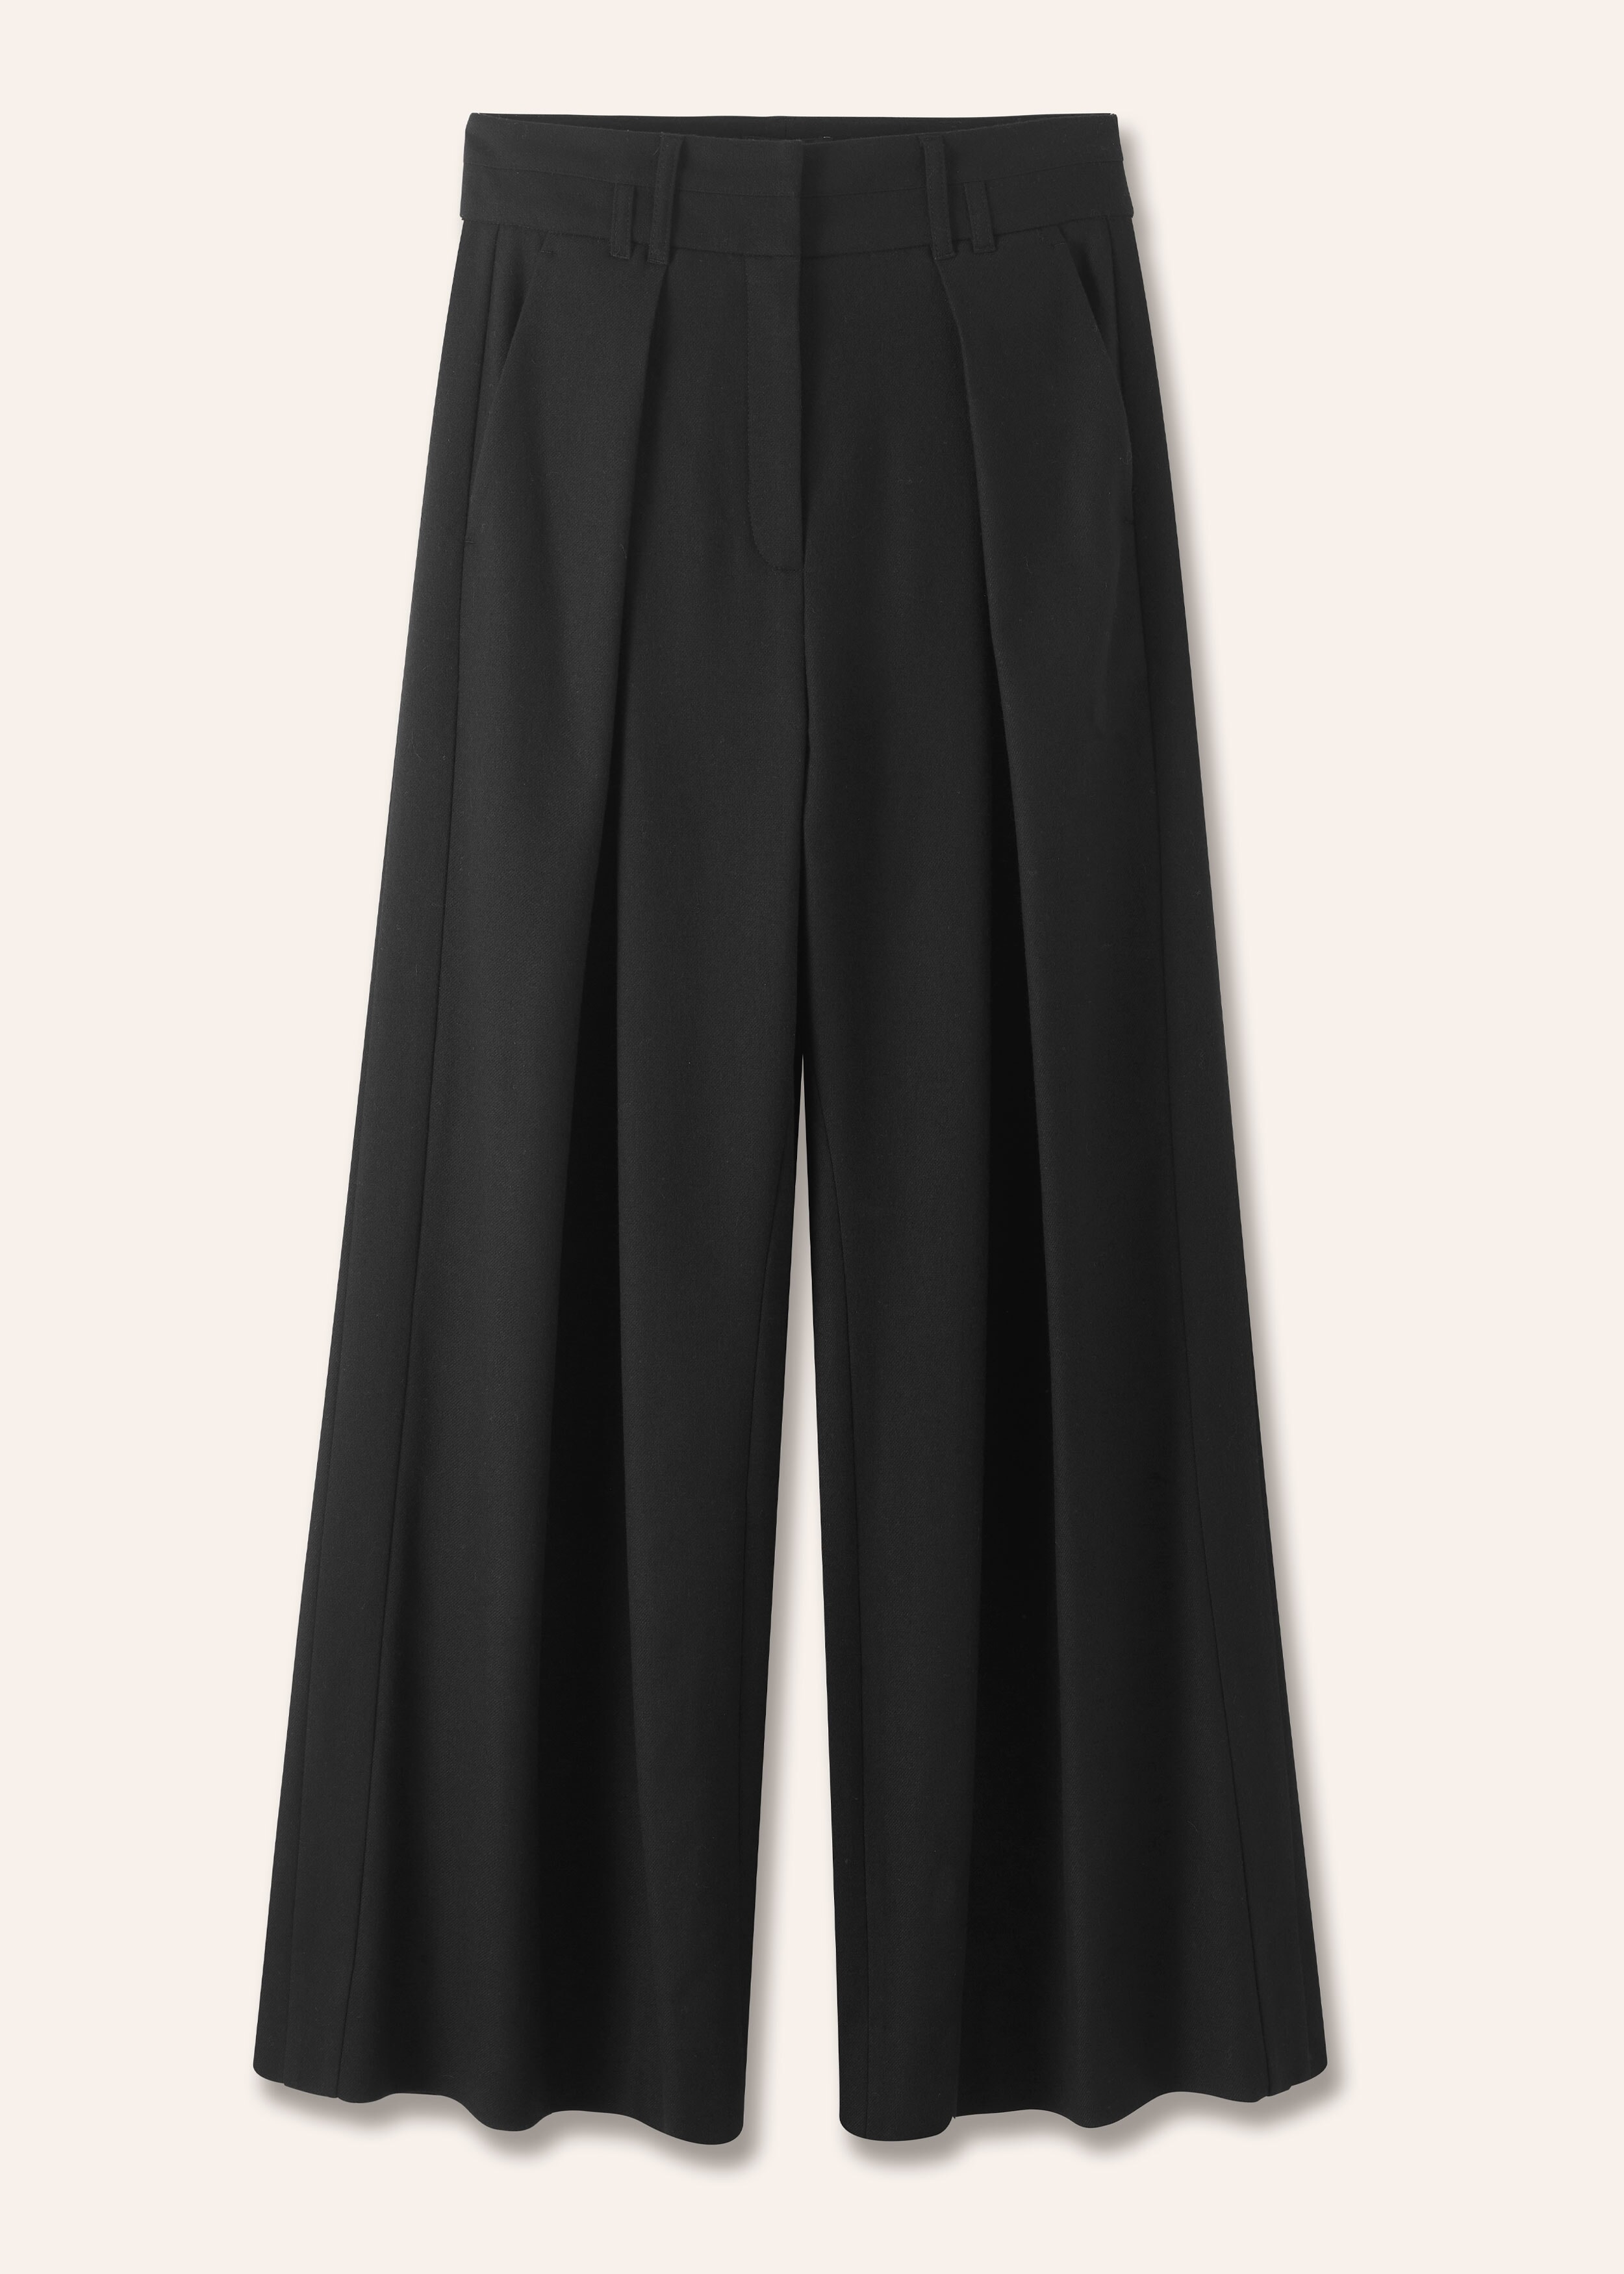 Flannel High-Waisted Pleat Wide-Leg Pant Black